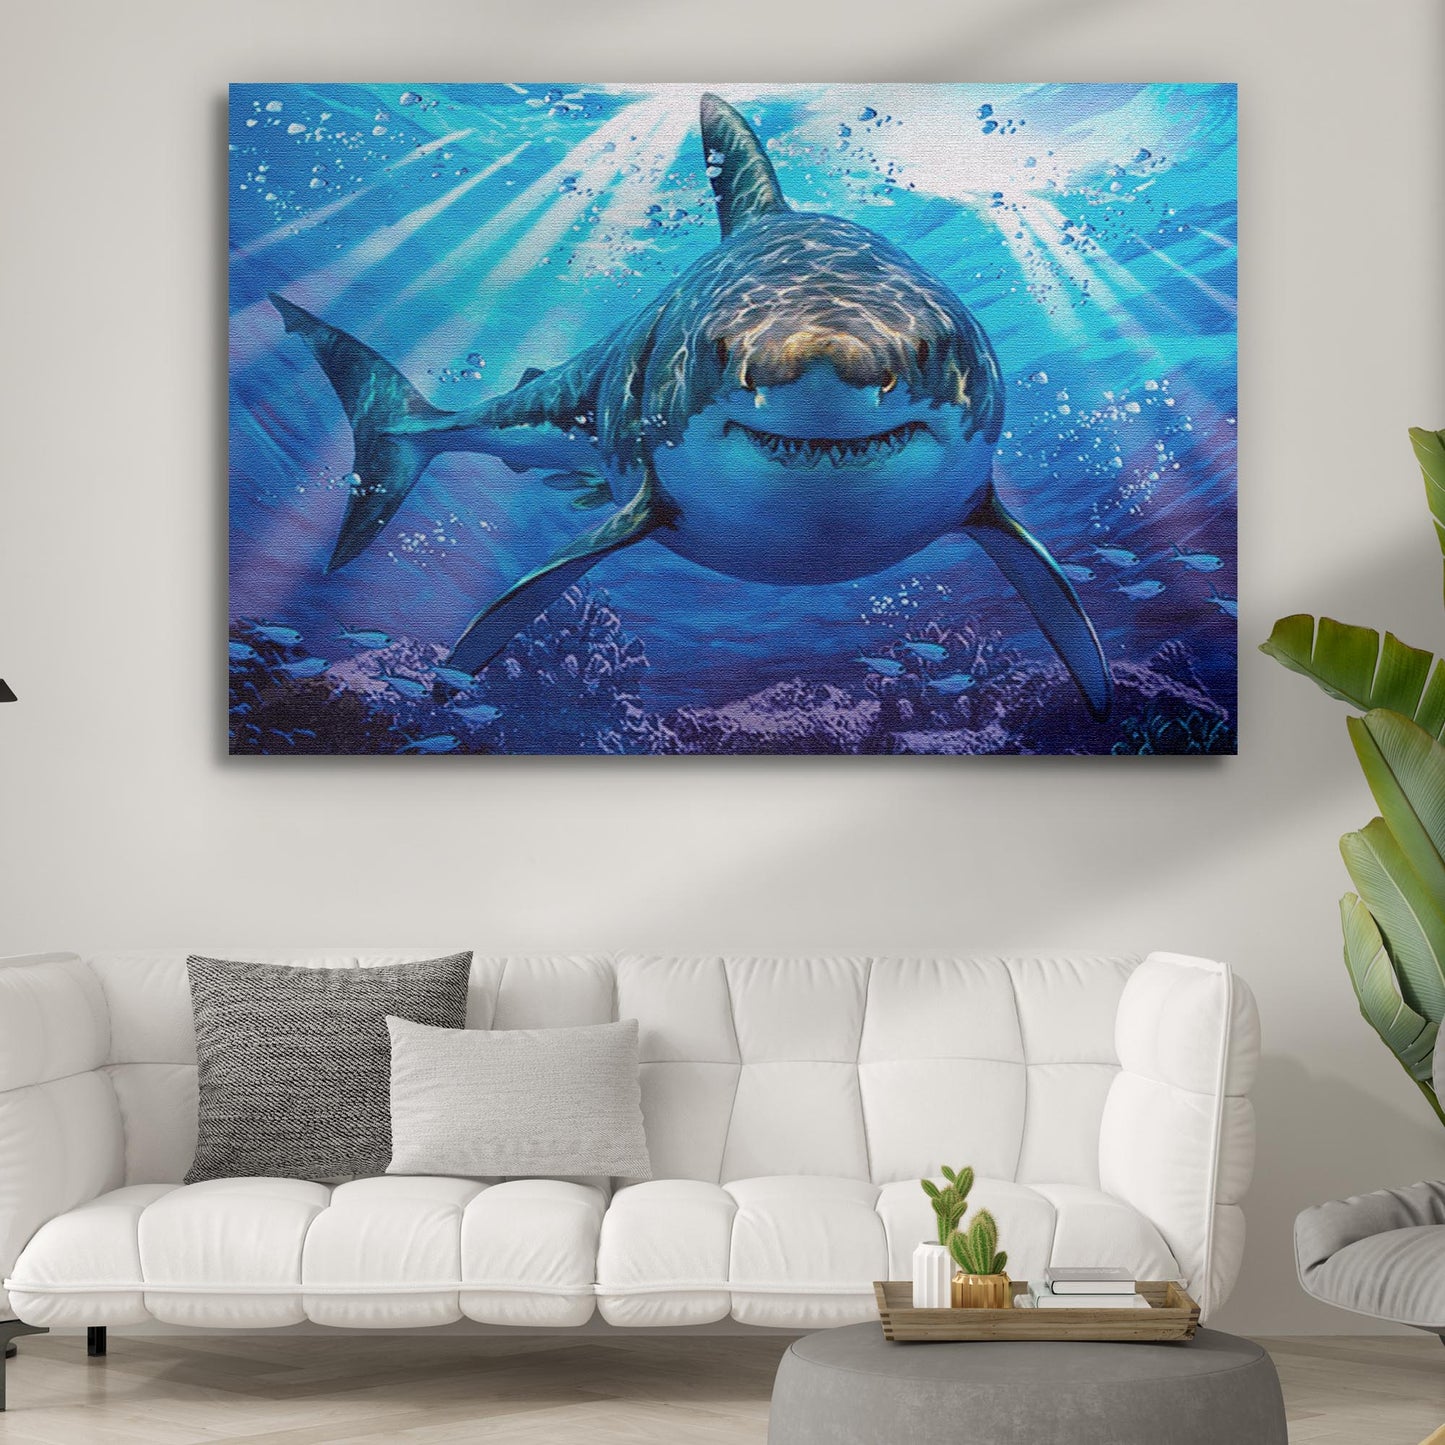 Underwater White Shark Canvas Wall Art - Image by Tailored Canvases